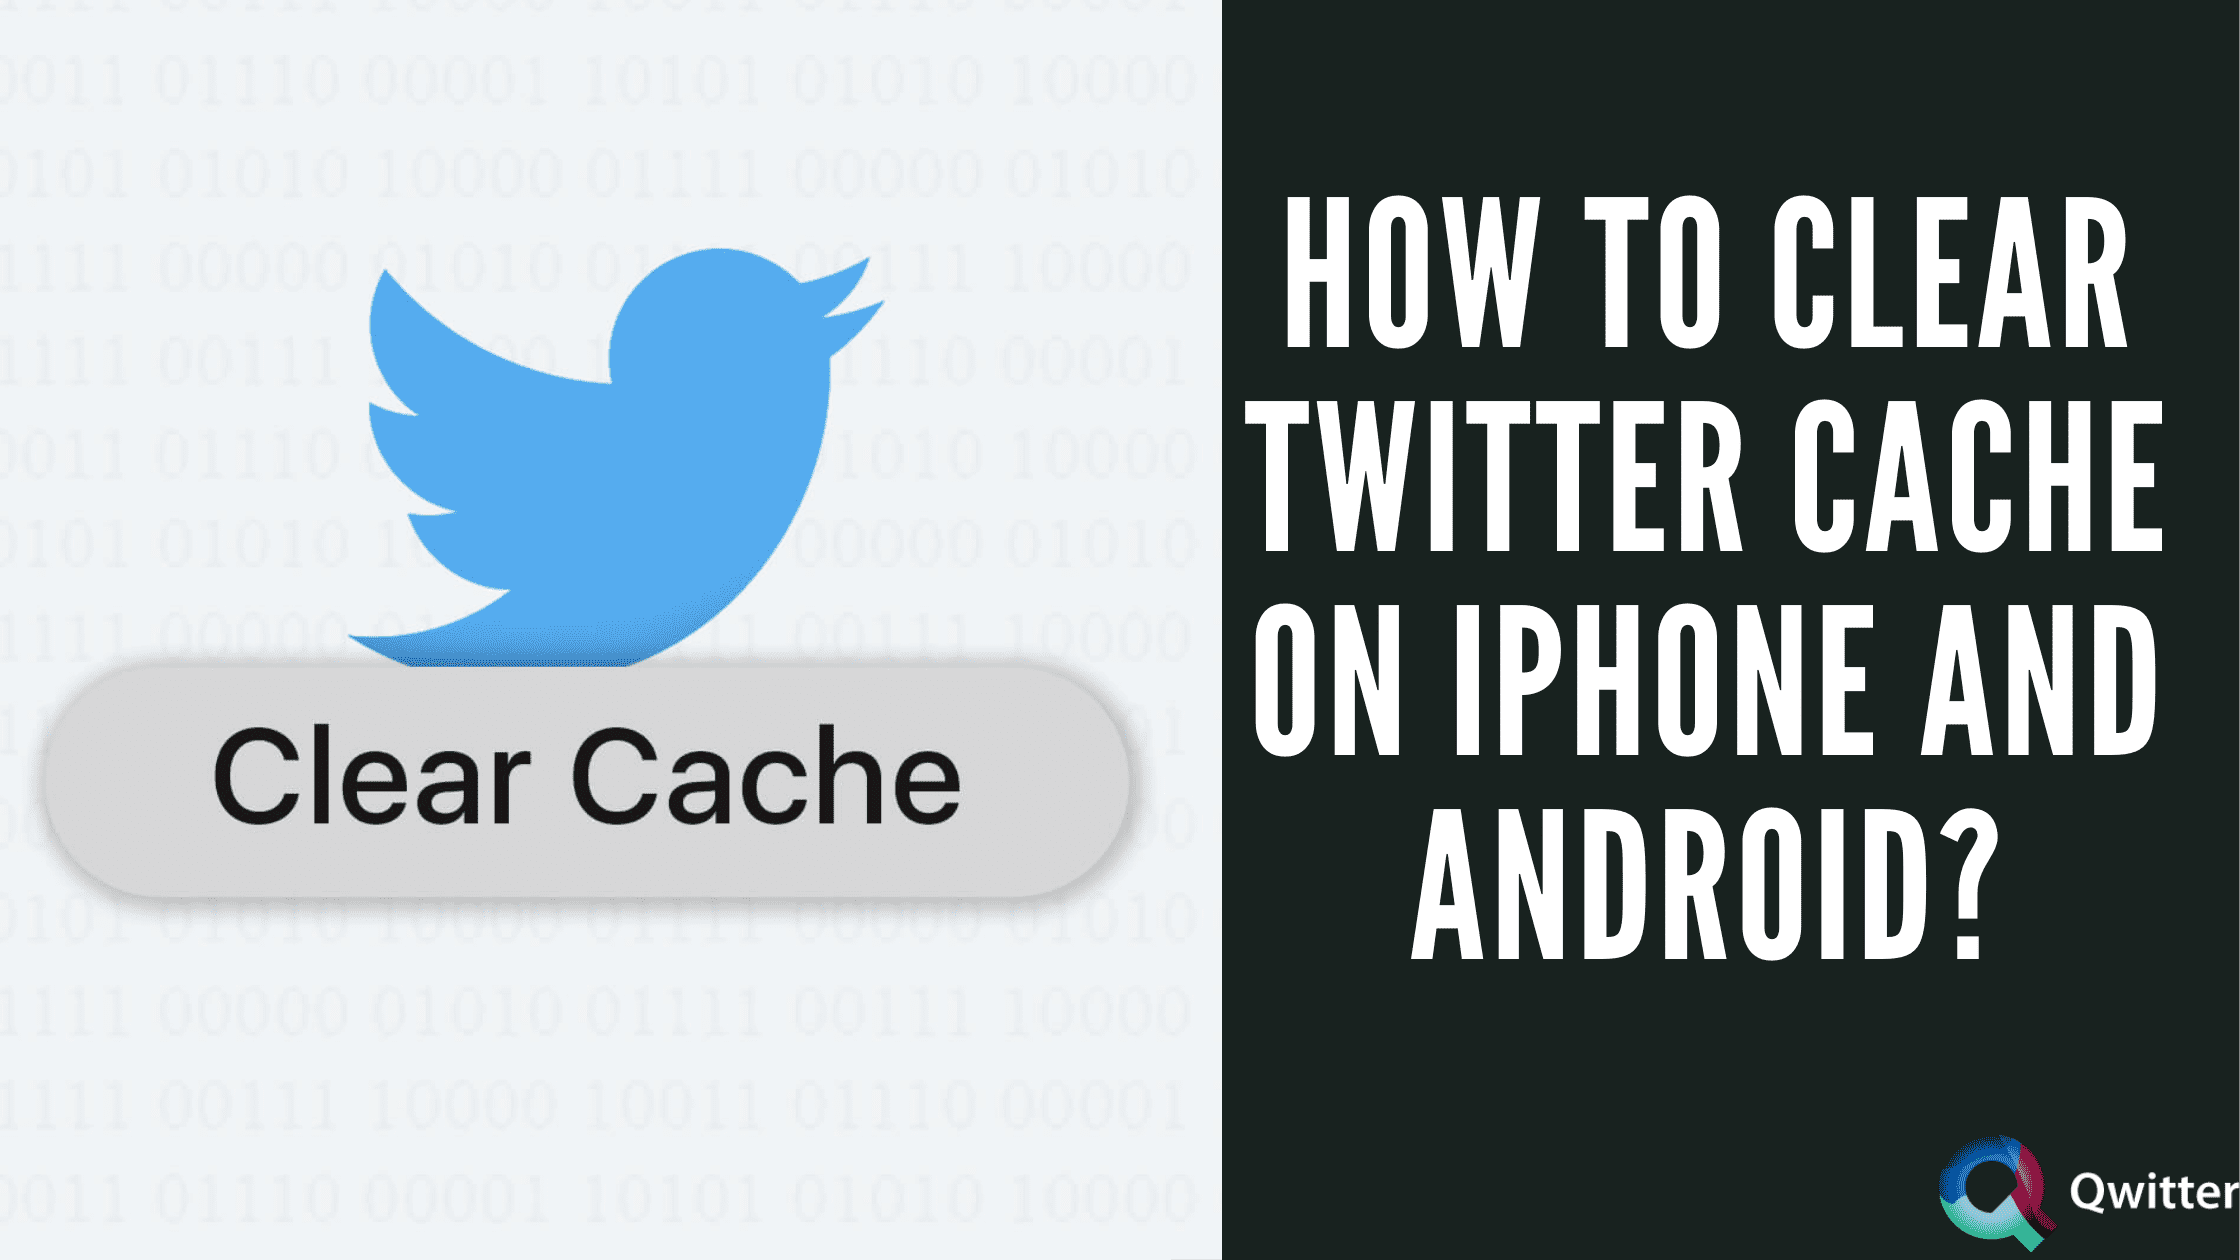 How To Clear Twitter Cache On iPhone and Android